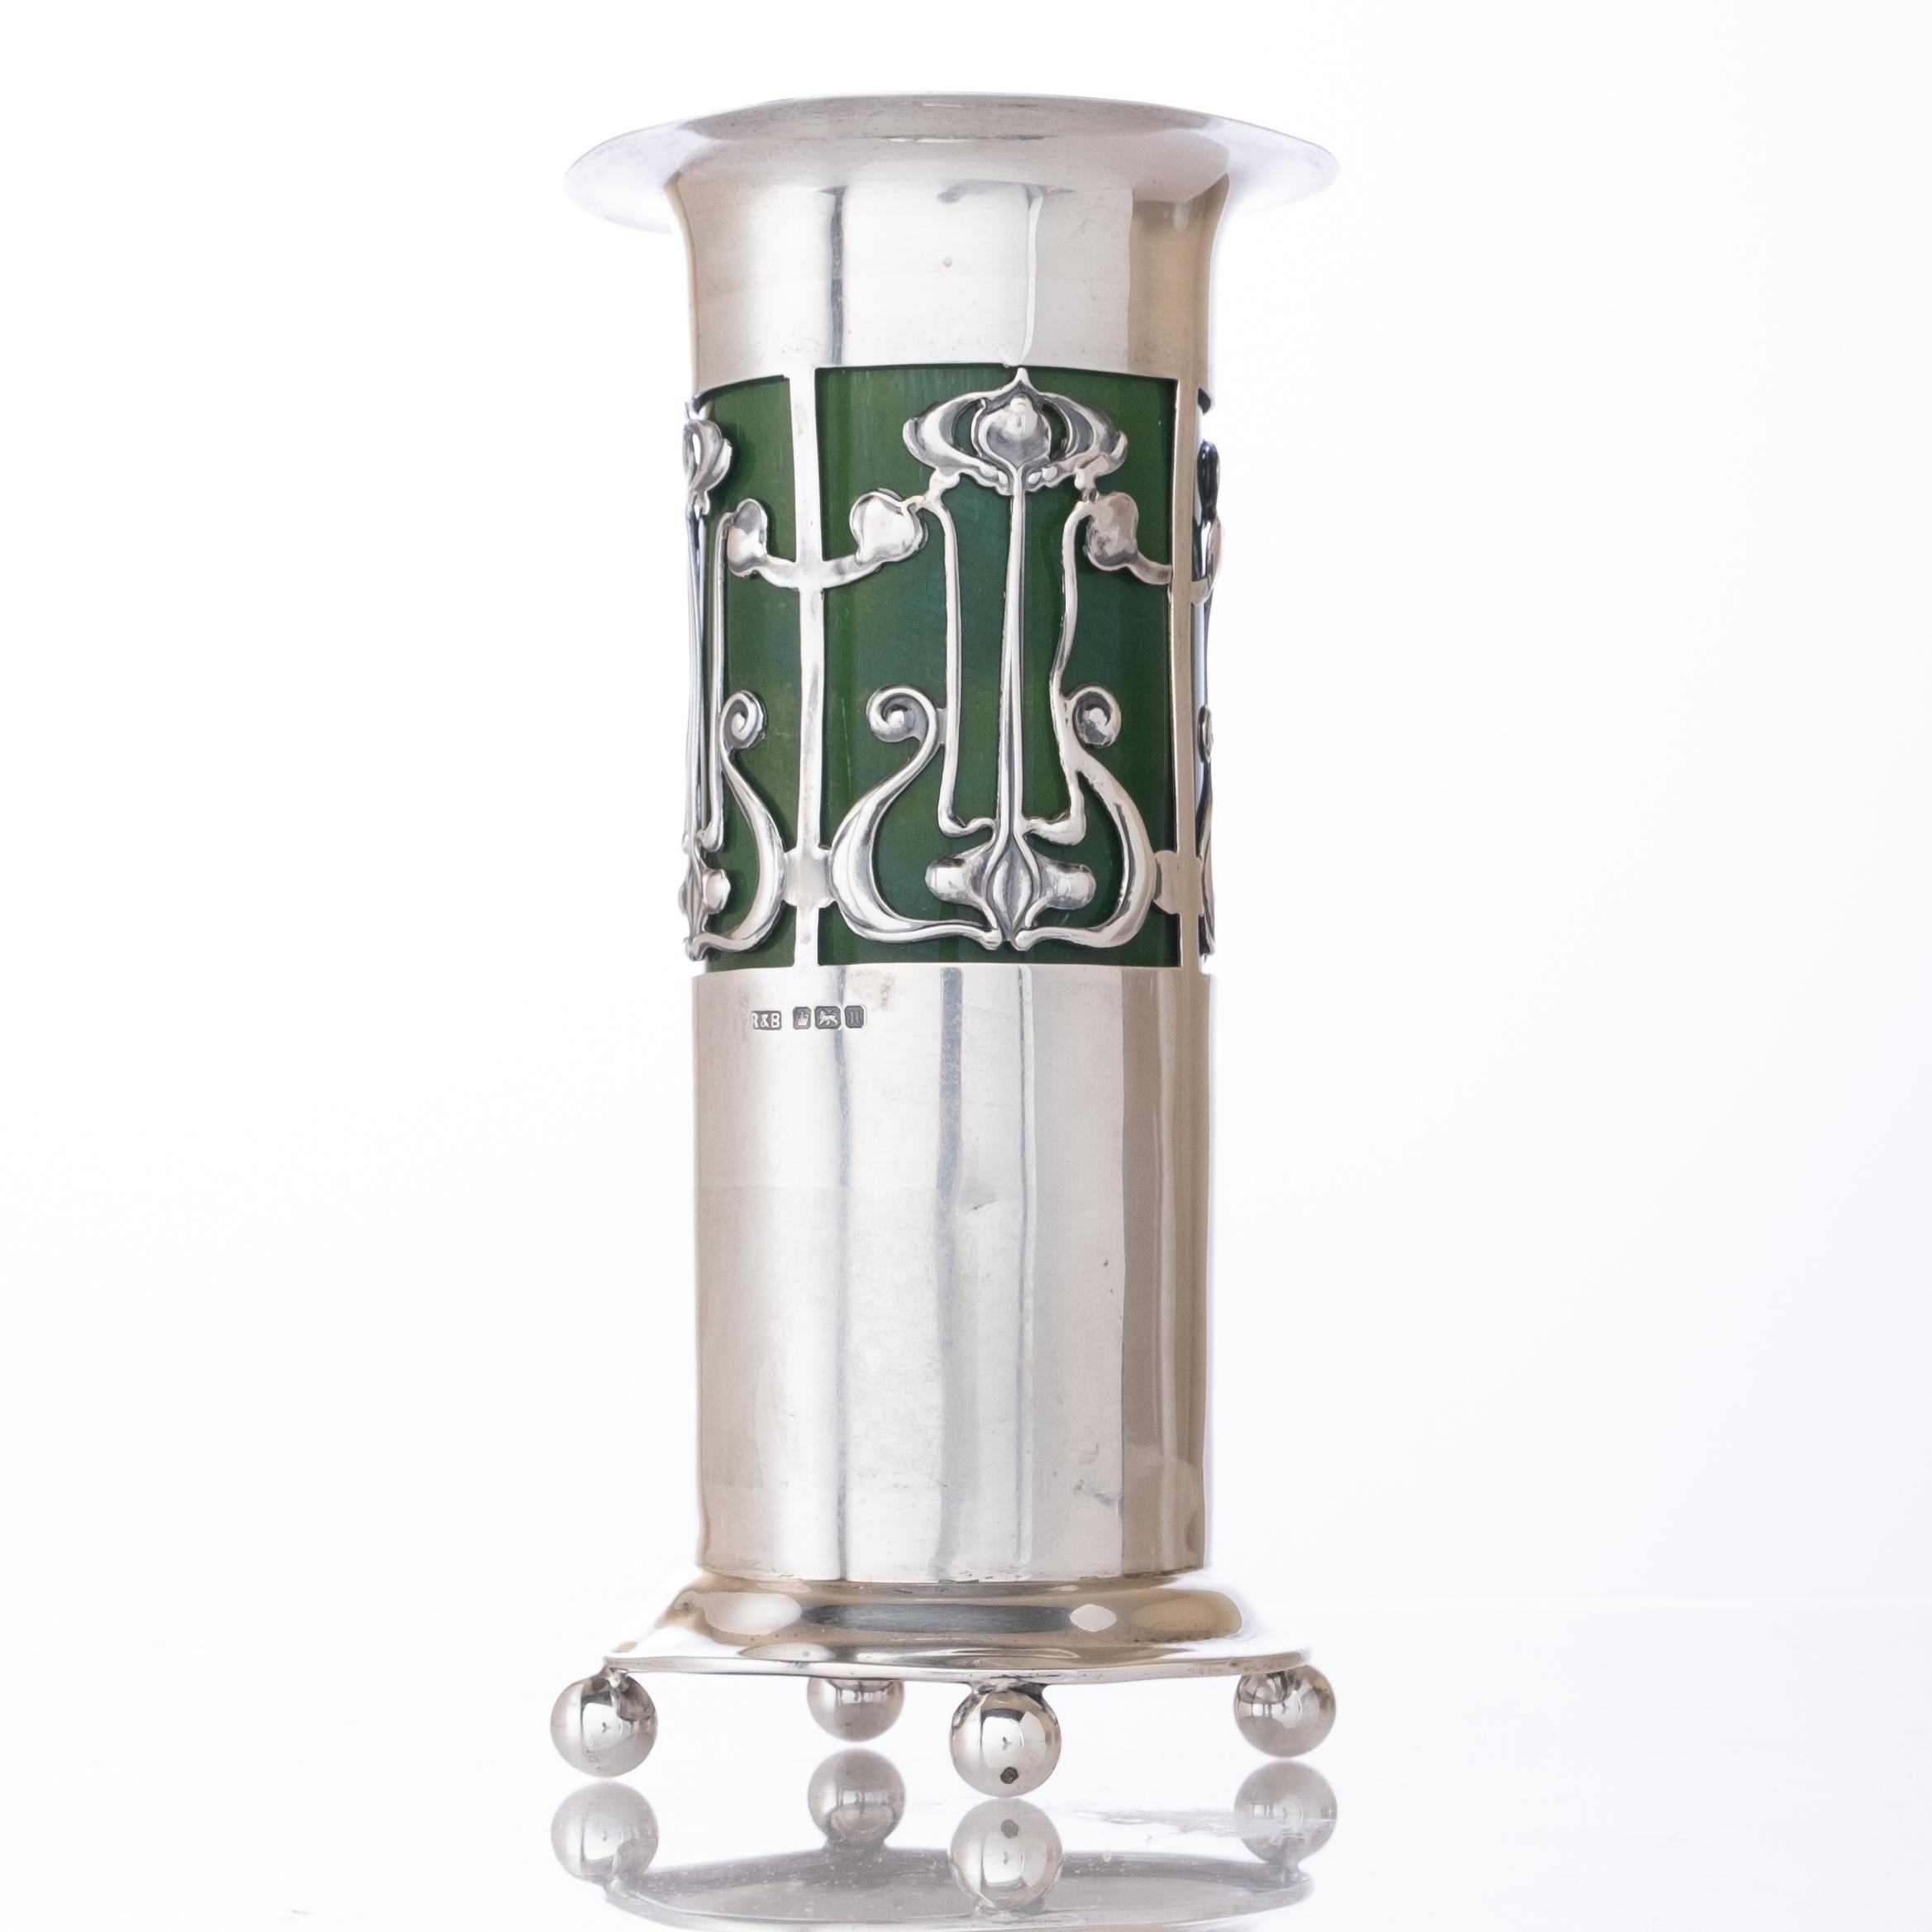 English sterling silver art nouveau-period vase with green glazed ceramic insert. The mark to the silver appears to be that of Roberts & Belk, Sheffield.

The firm was established in Sheffield in 1809 under the name of Furnyss, Pole & Turner. From